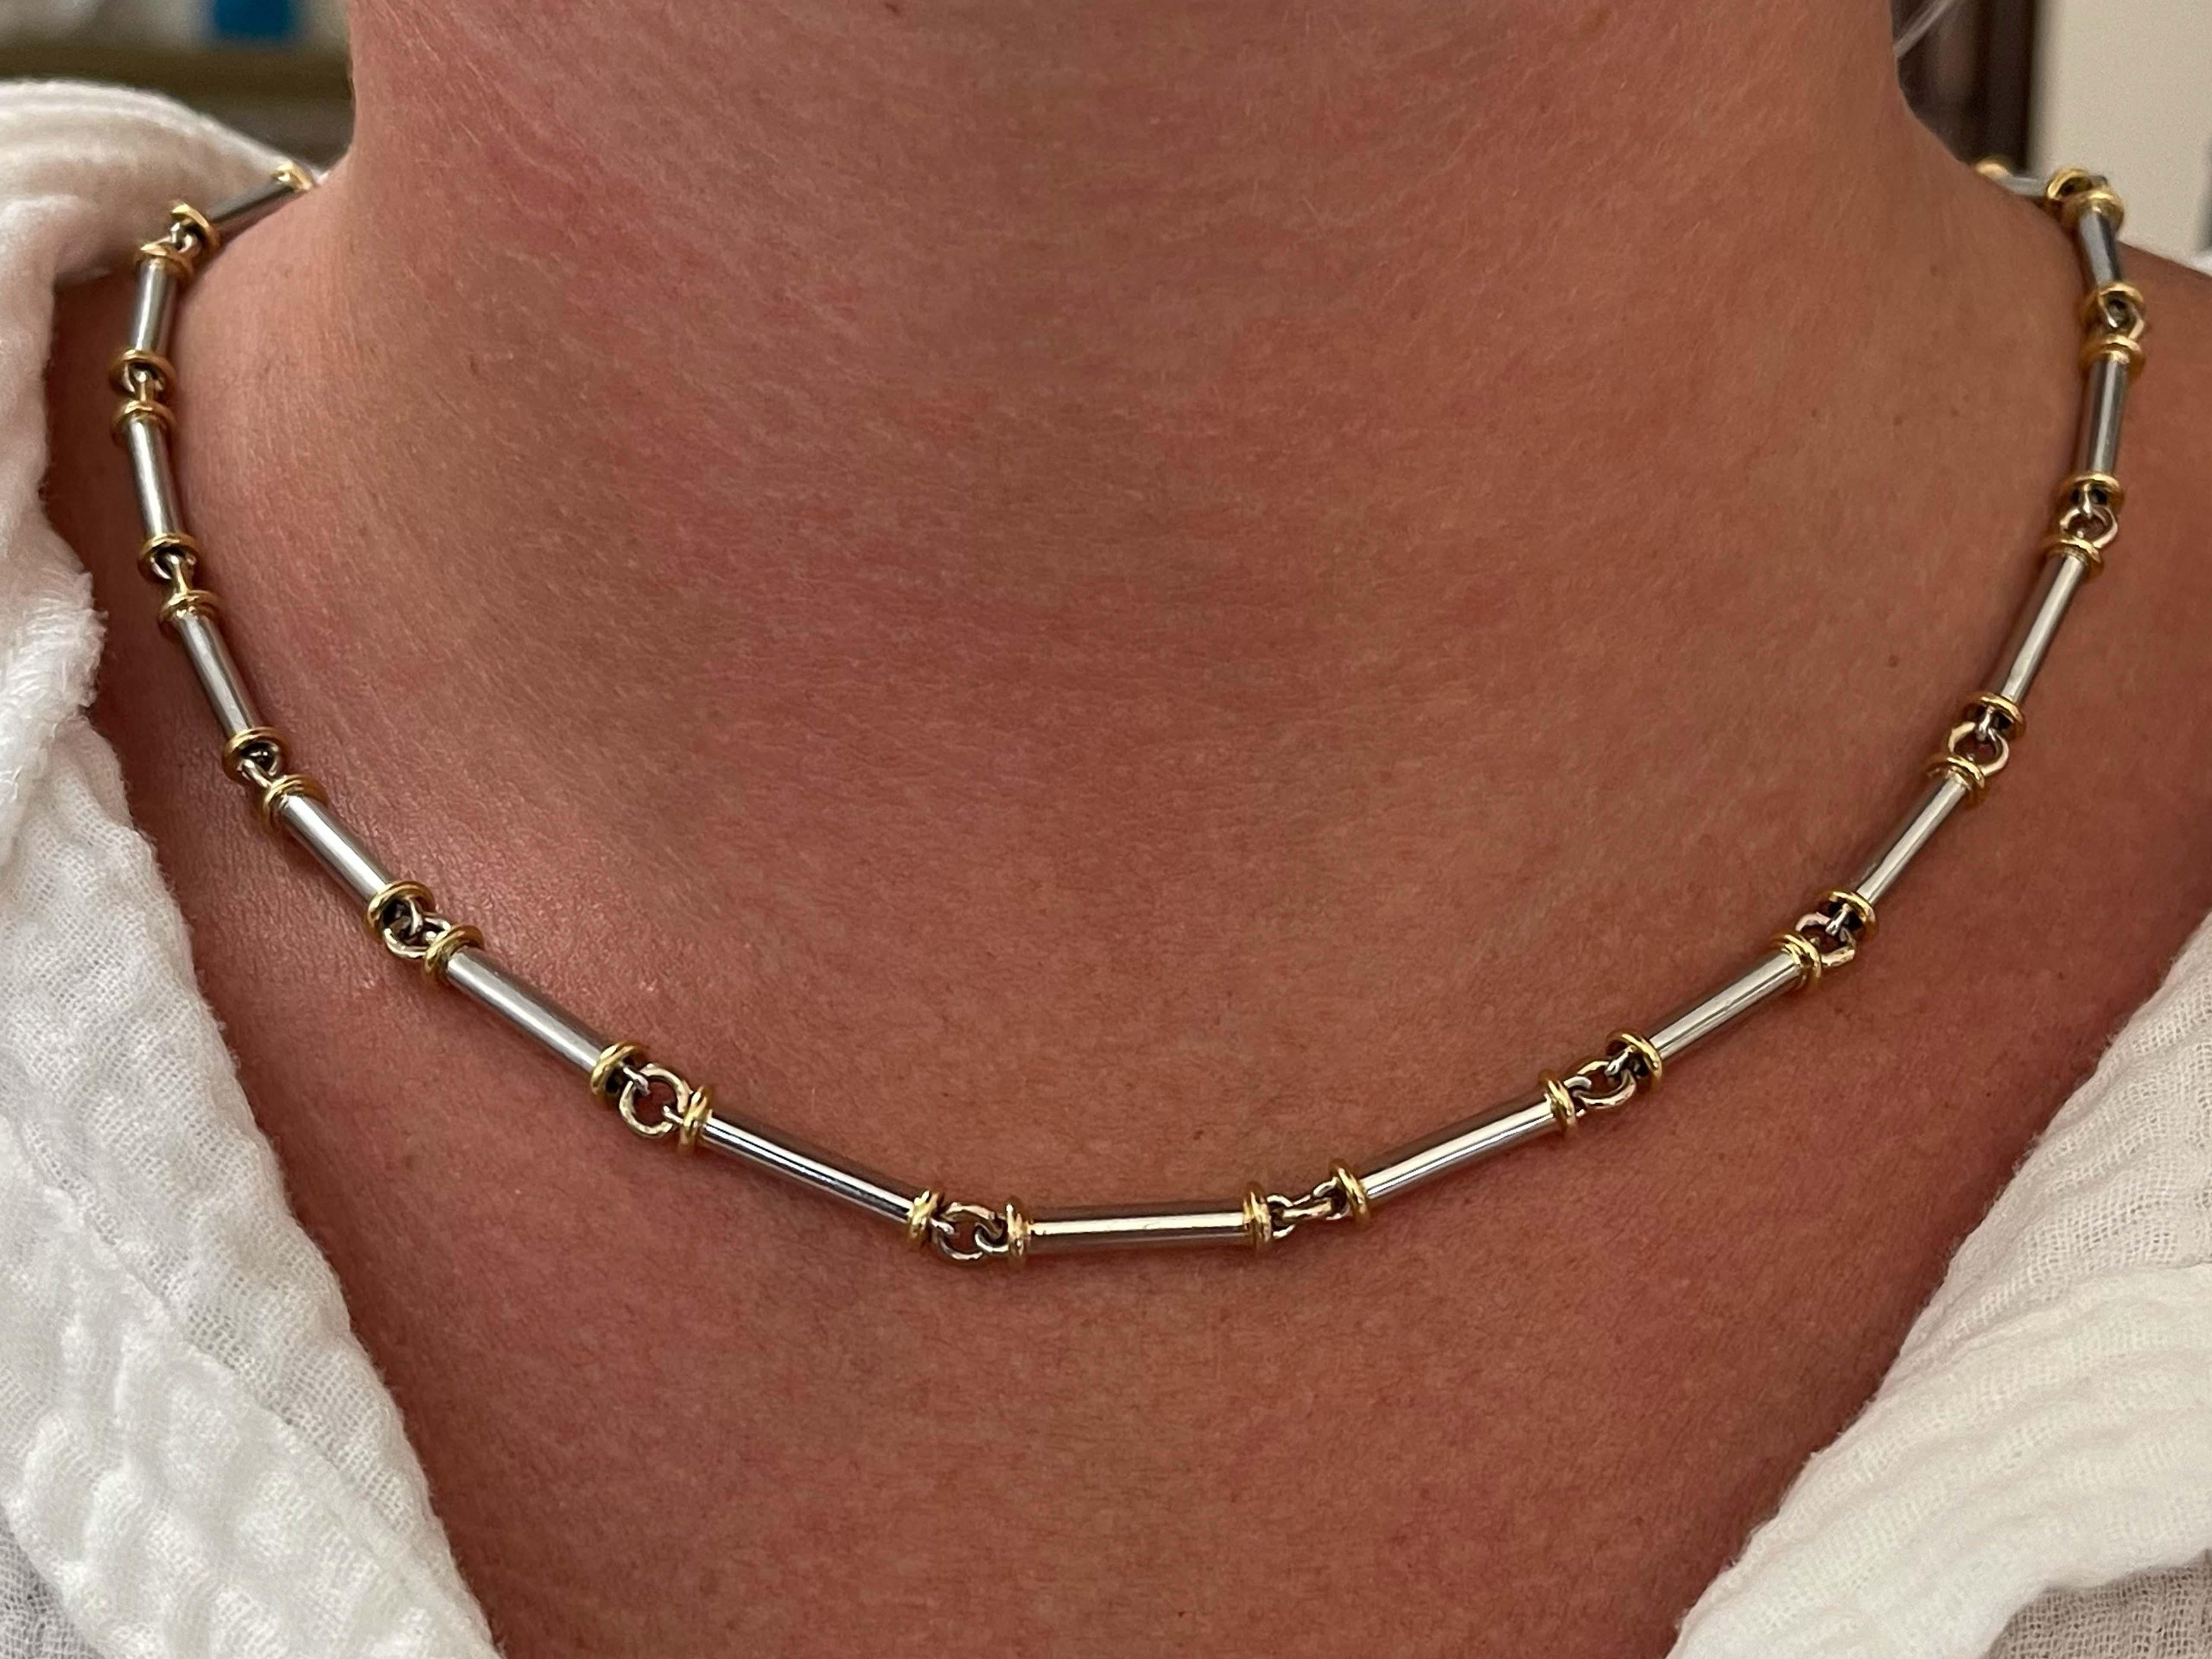 Item Specifications:

Style: Sectional Necklace

Metal: Platinum and 18k Yellow Gold

Total Weight: 31.3 Grams

Chain Length: 18 inch

Closure: Lobster Clasp
​
​Stamped: 